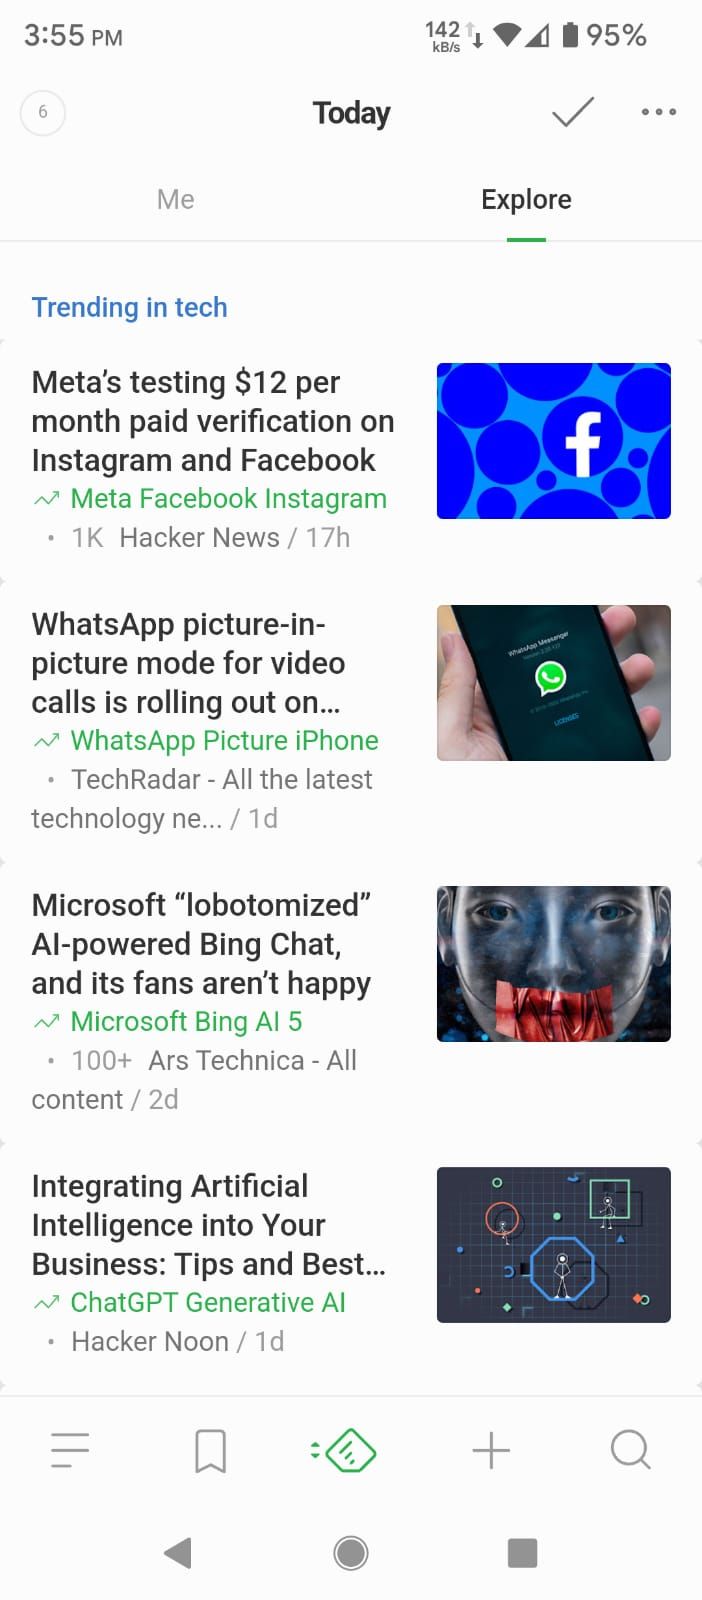 Explore Tab in the Feedly App